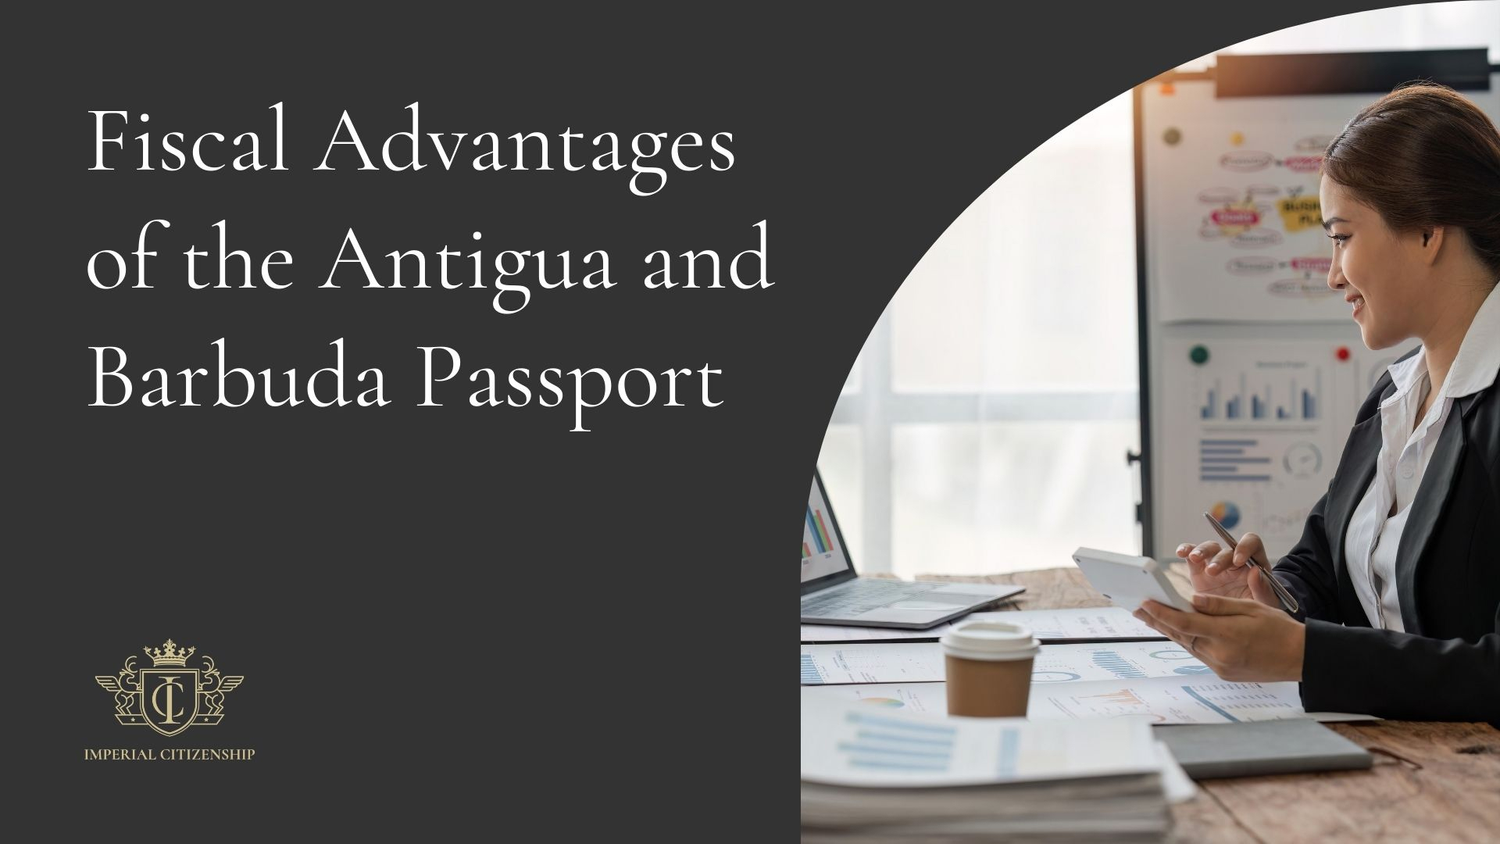 Fiscal Advantages of the Antigua and Barbuda Passport